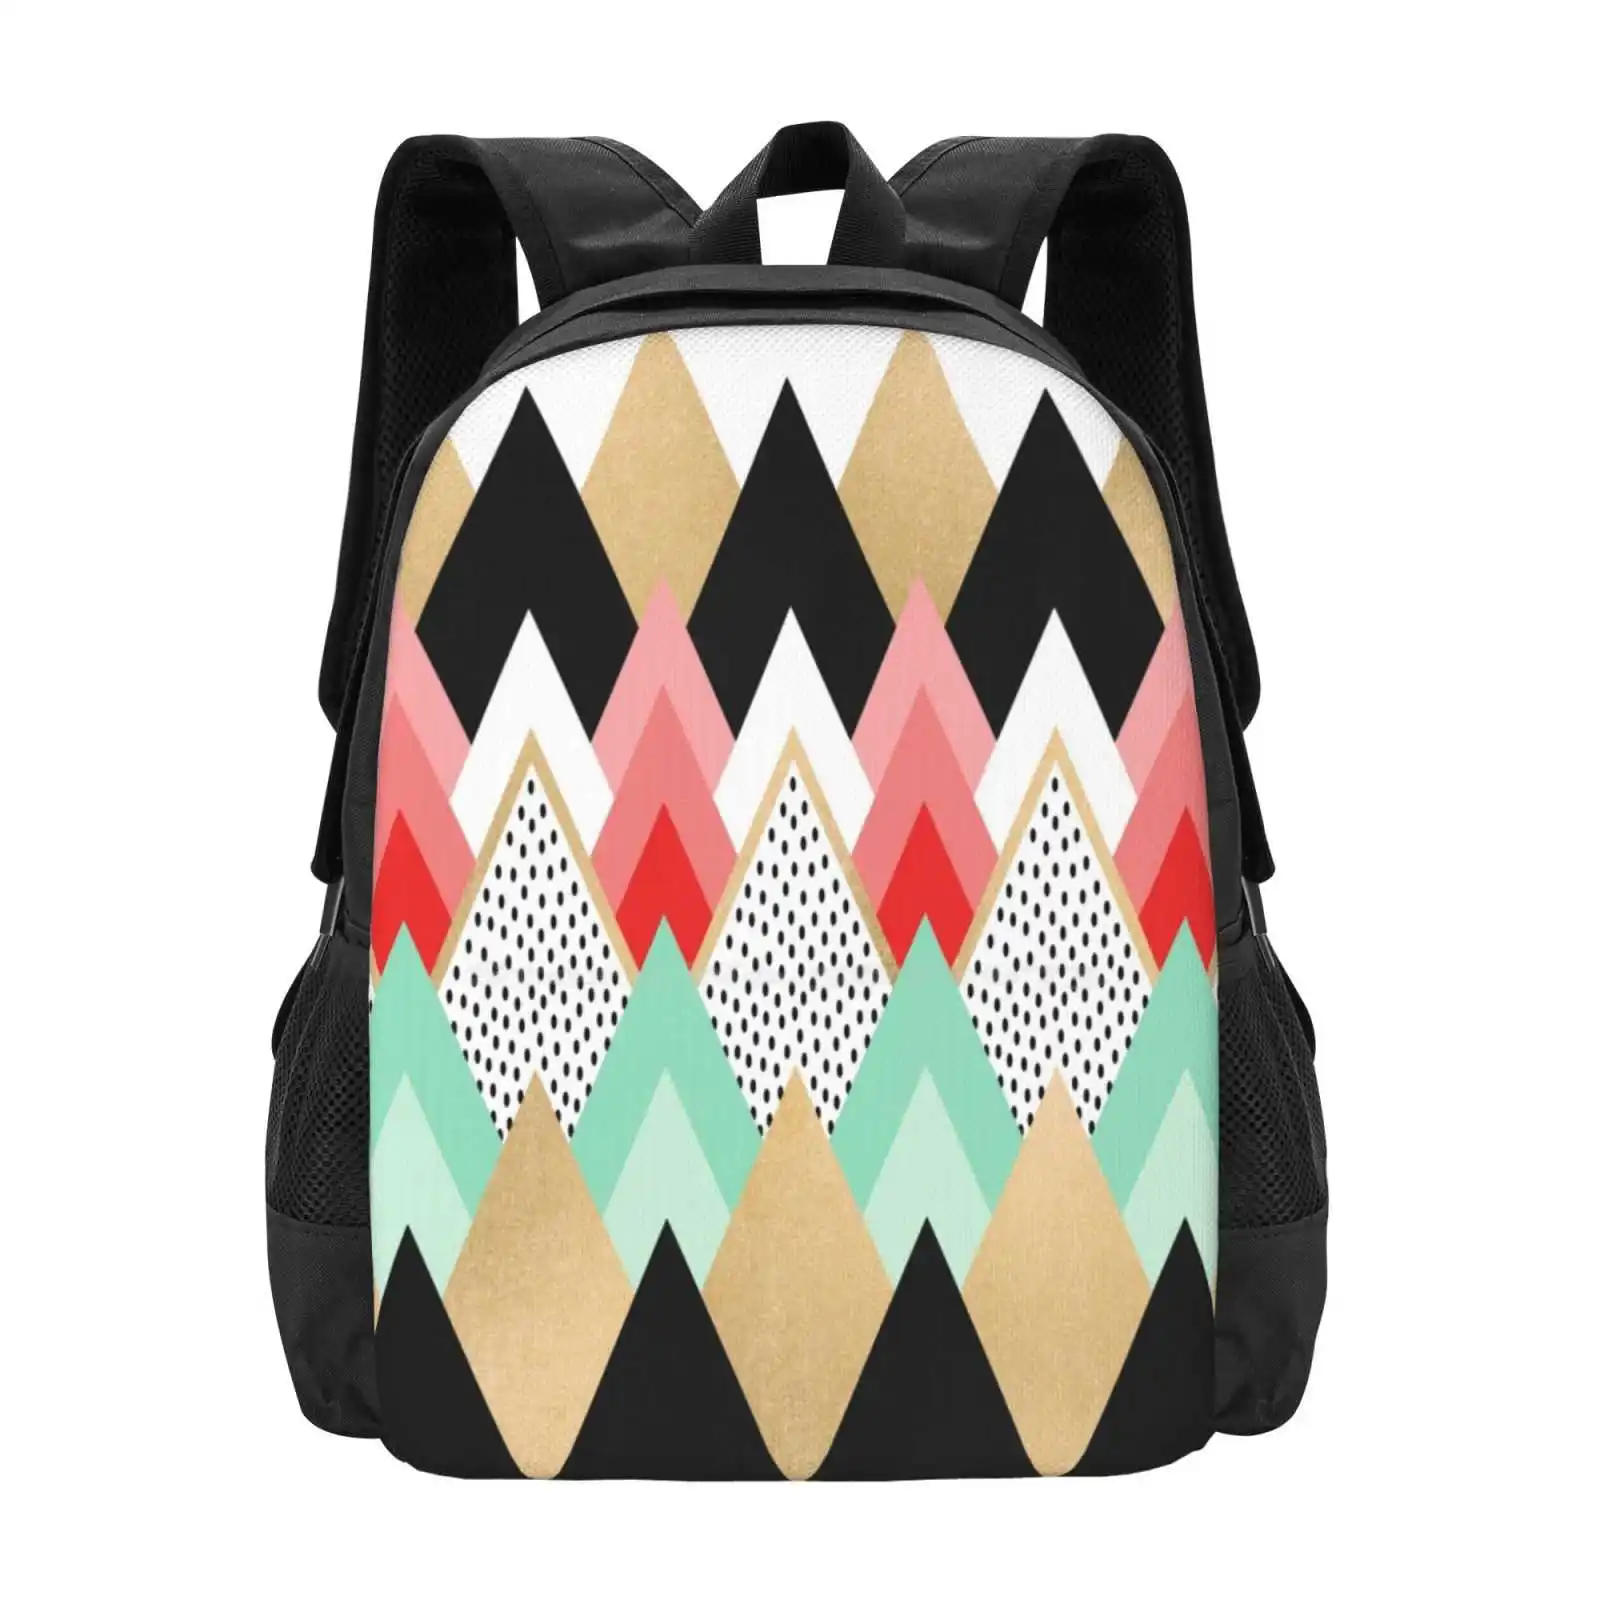 

Princess Backpacks For School Teenagers Girls Travel Bags Graphic Pattern Abstract Triangles Geometric Geometry Sweet Pastels